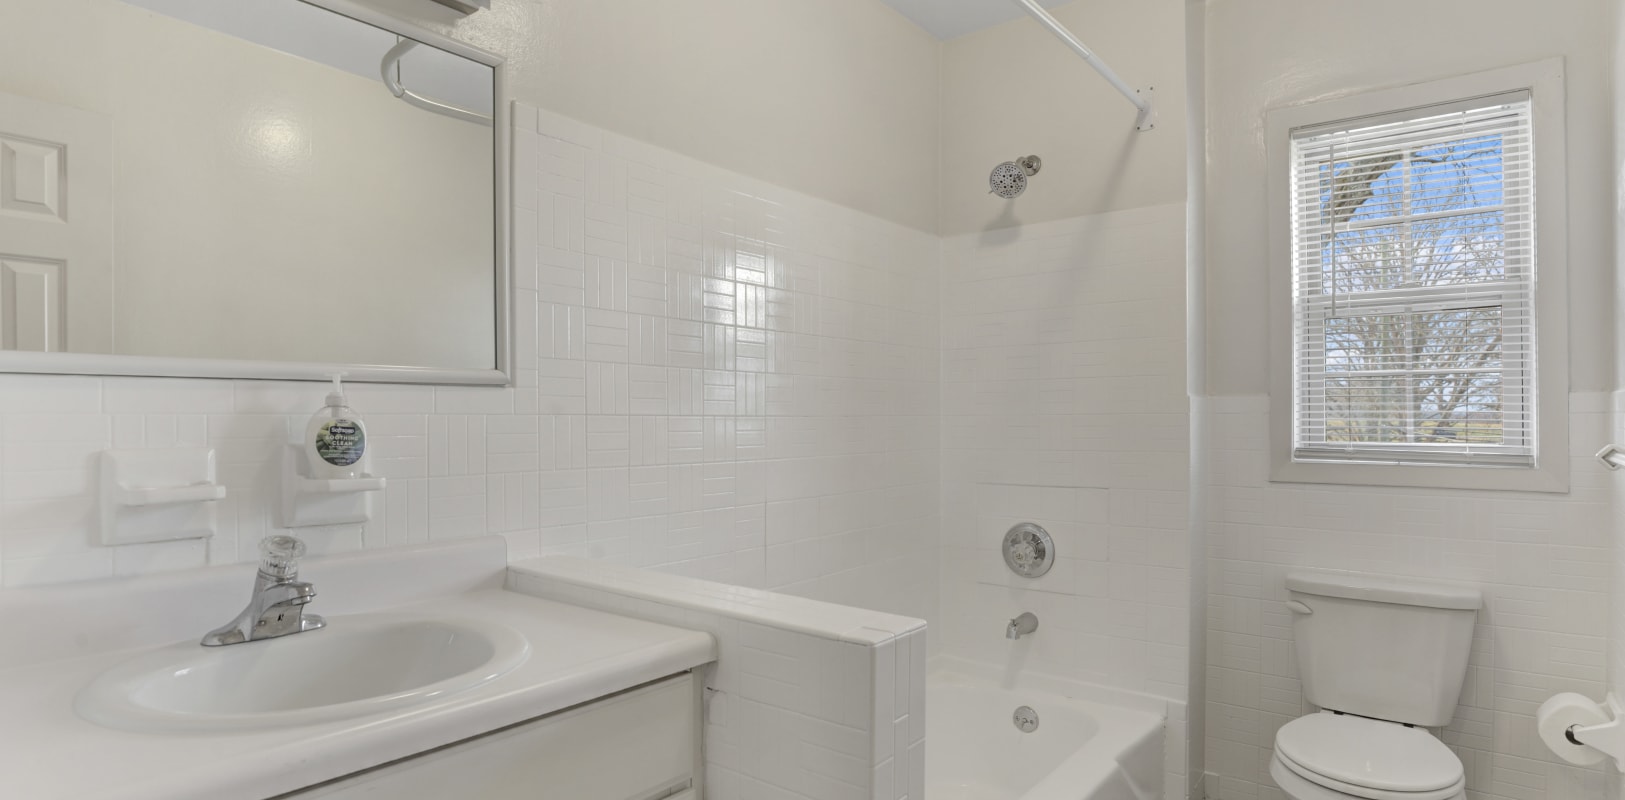 Bathroom with white tiles at Versailles Apartments in Ewing, New Jersey